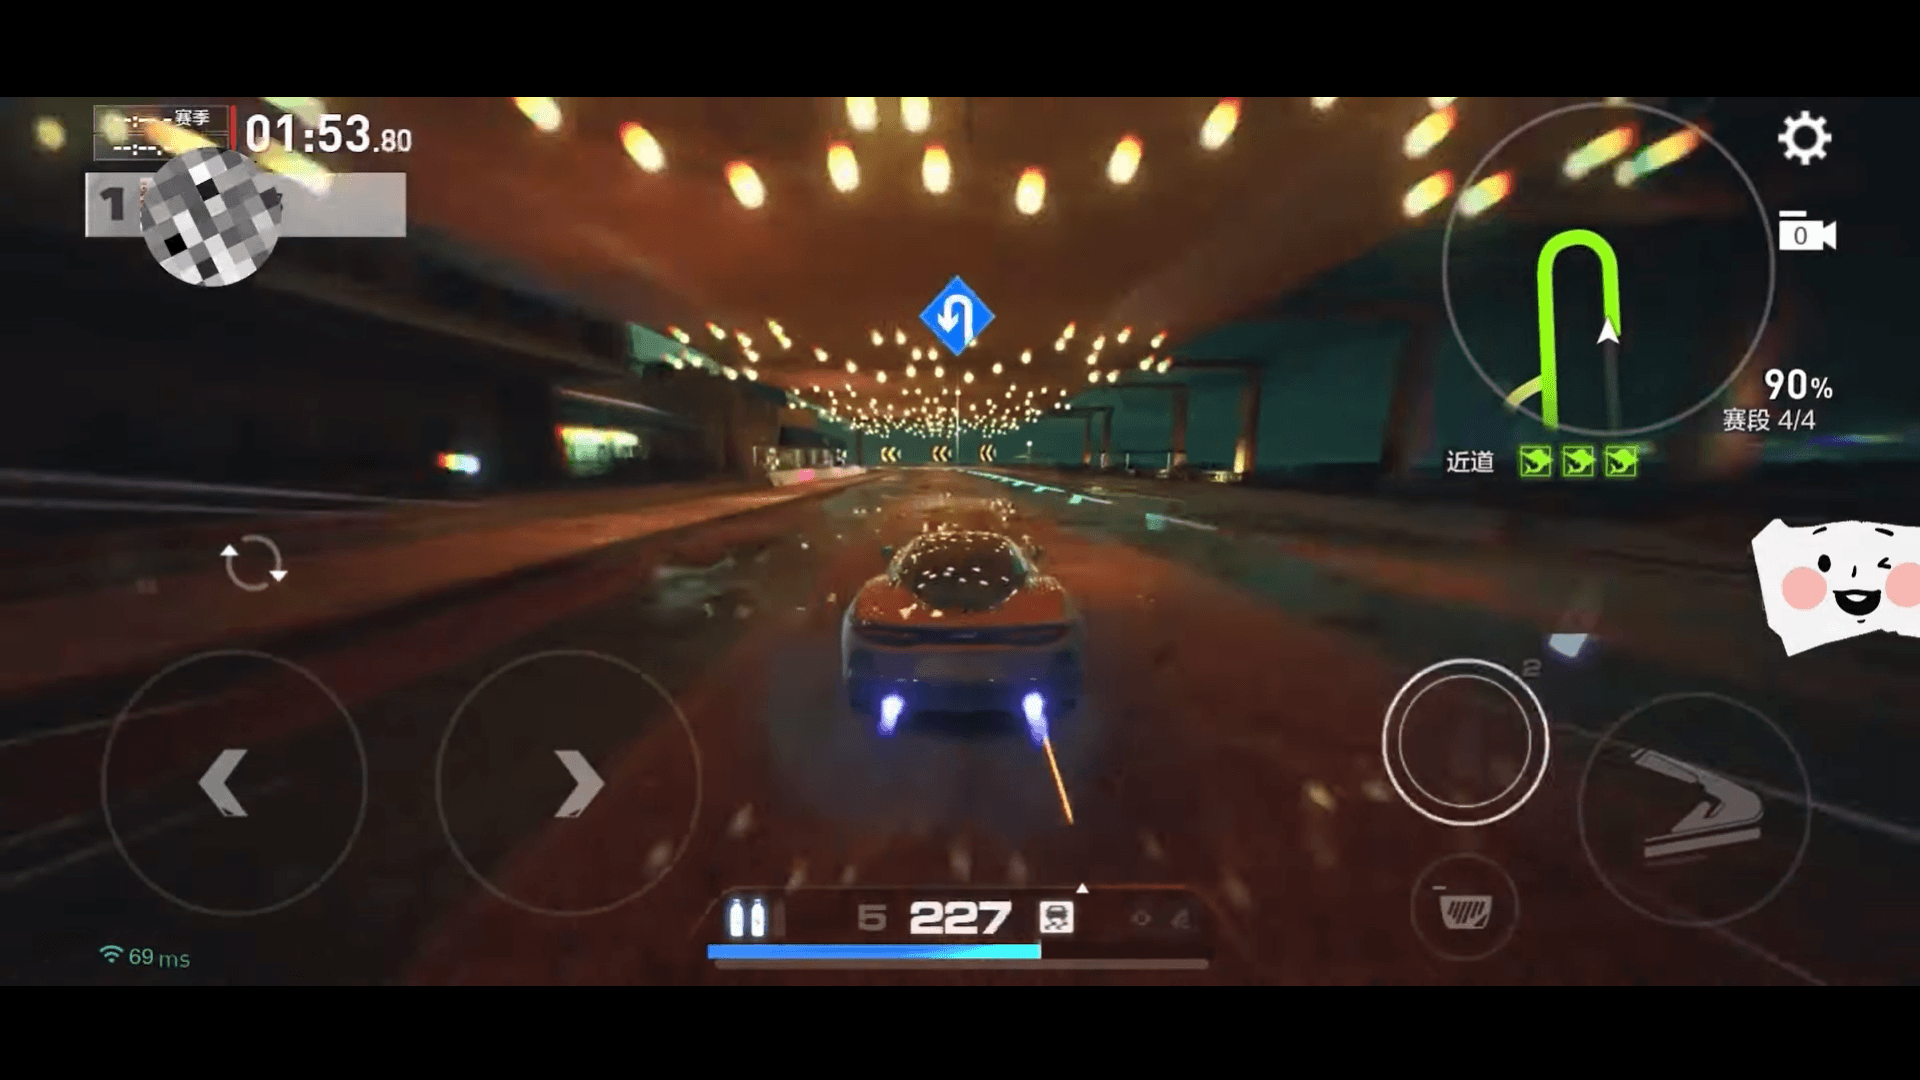 Need For Speed Mobile Gameplay Leaked Online: Here’s How It Looks